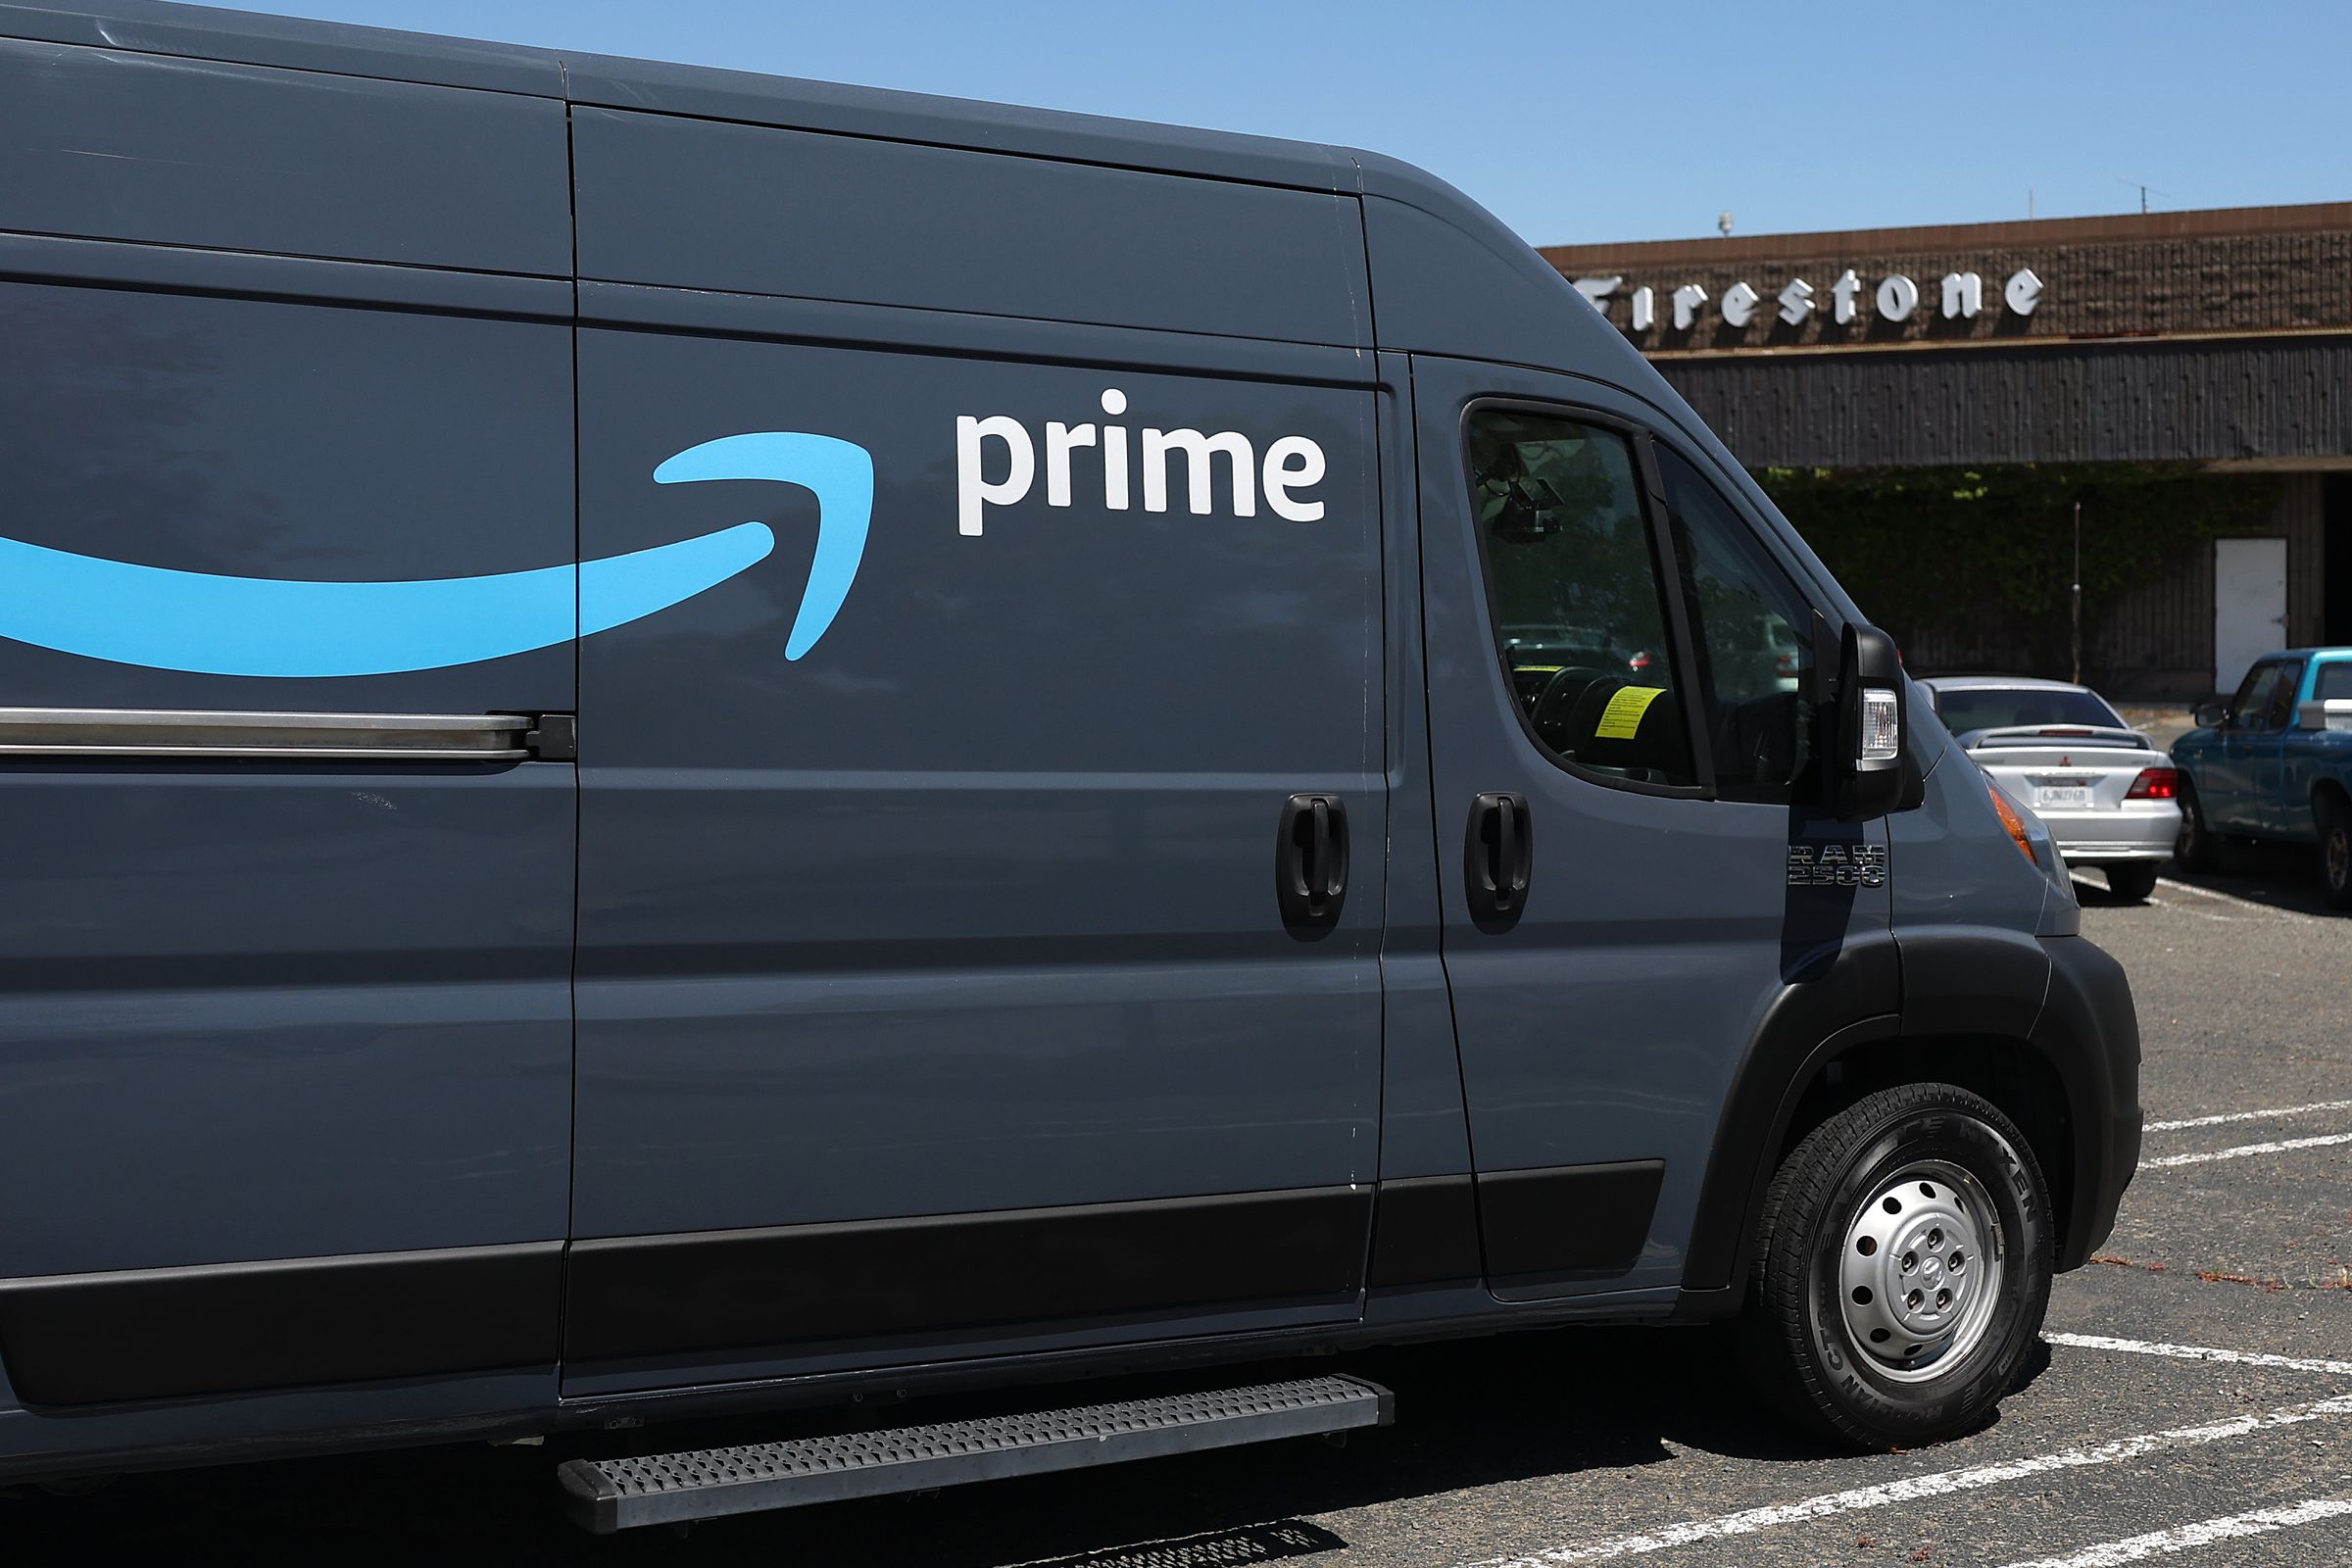 Prime members now get free same-day shipping for holiday